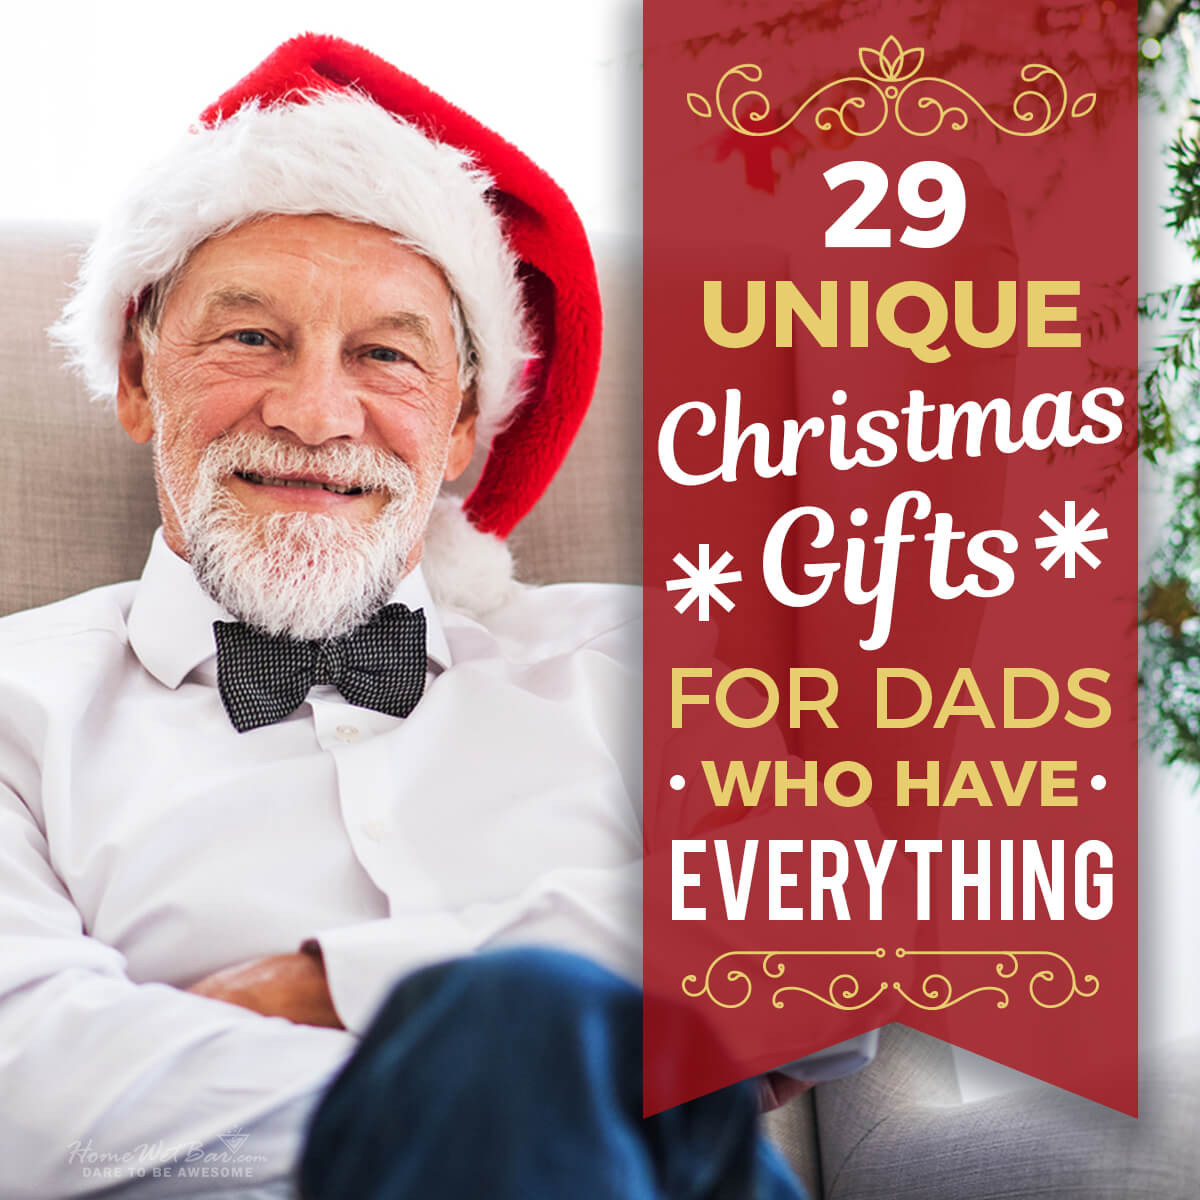 Birthday Gifts For Dad Who Has Everything
 29 Unique Christmas Gifts for Dads Who Have Everything